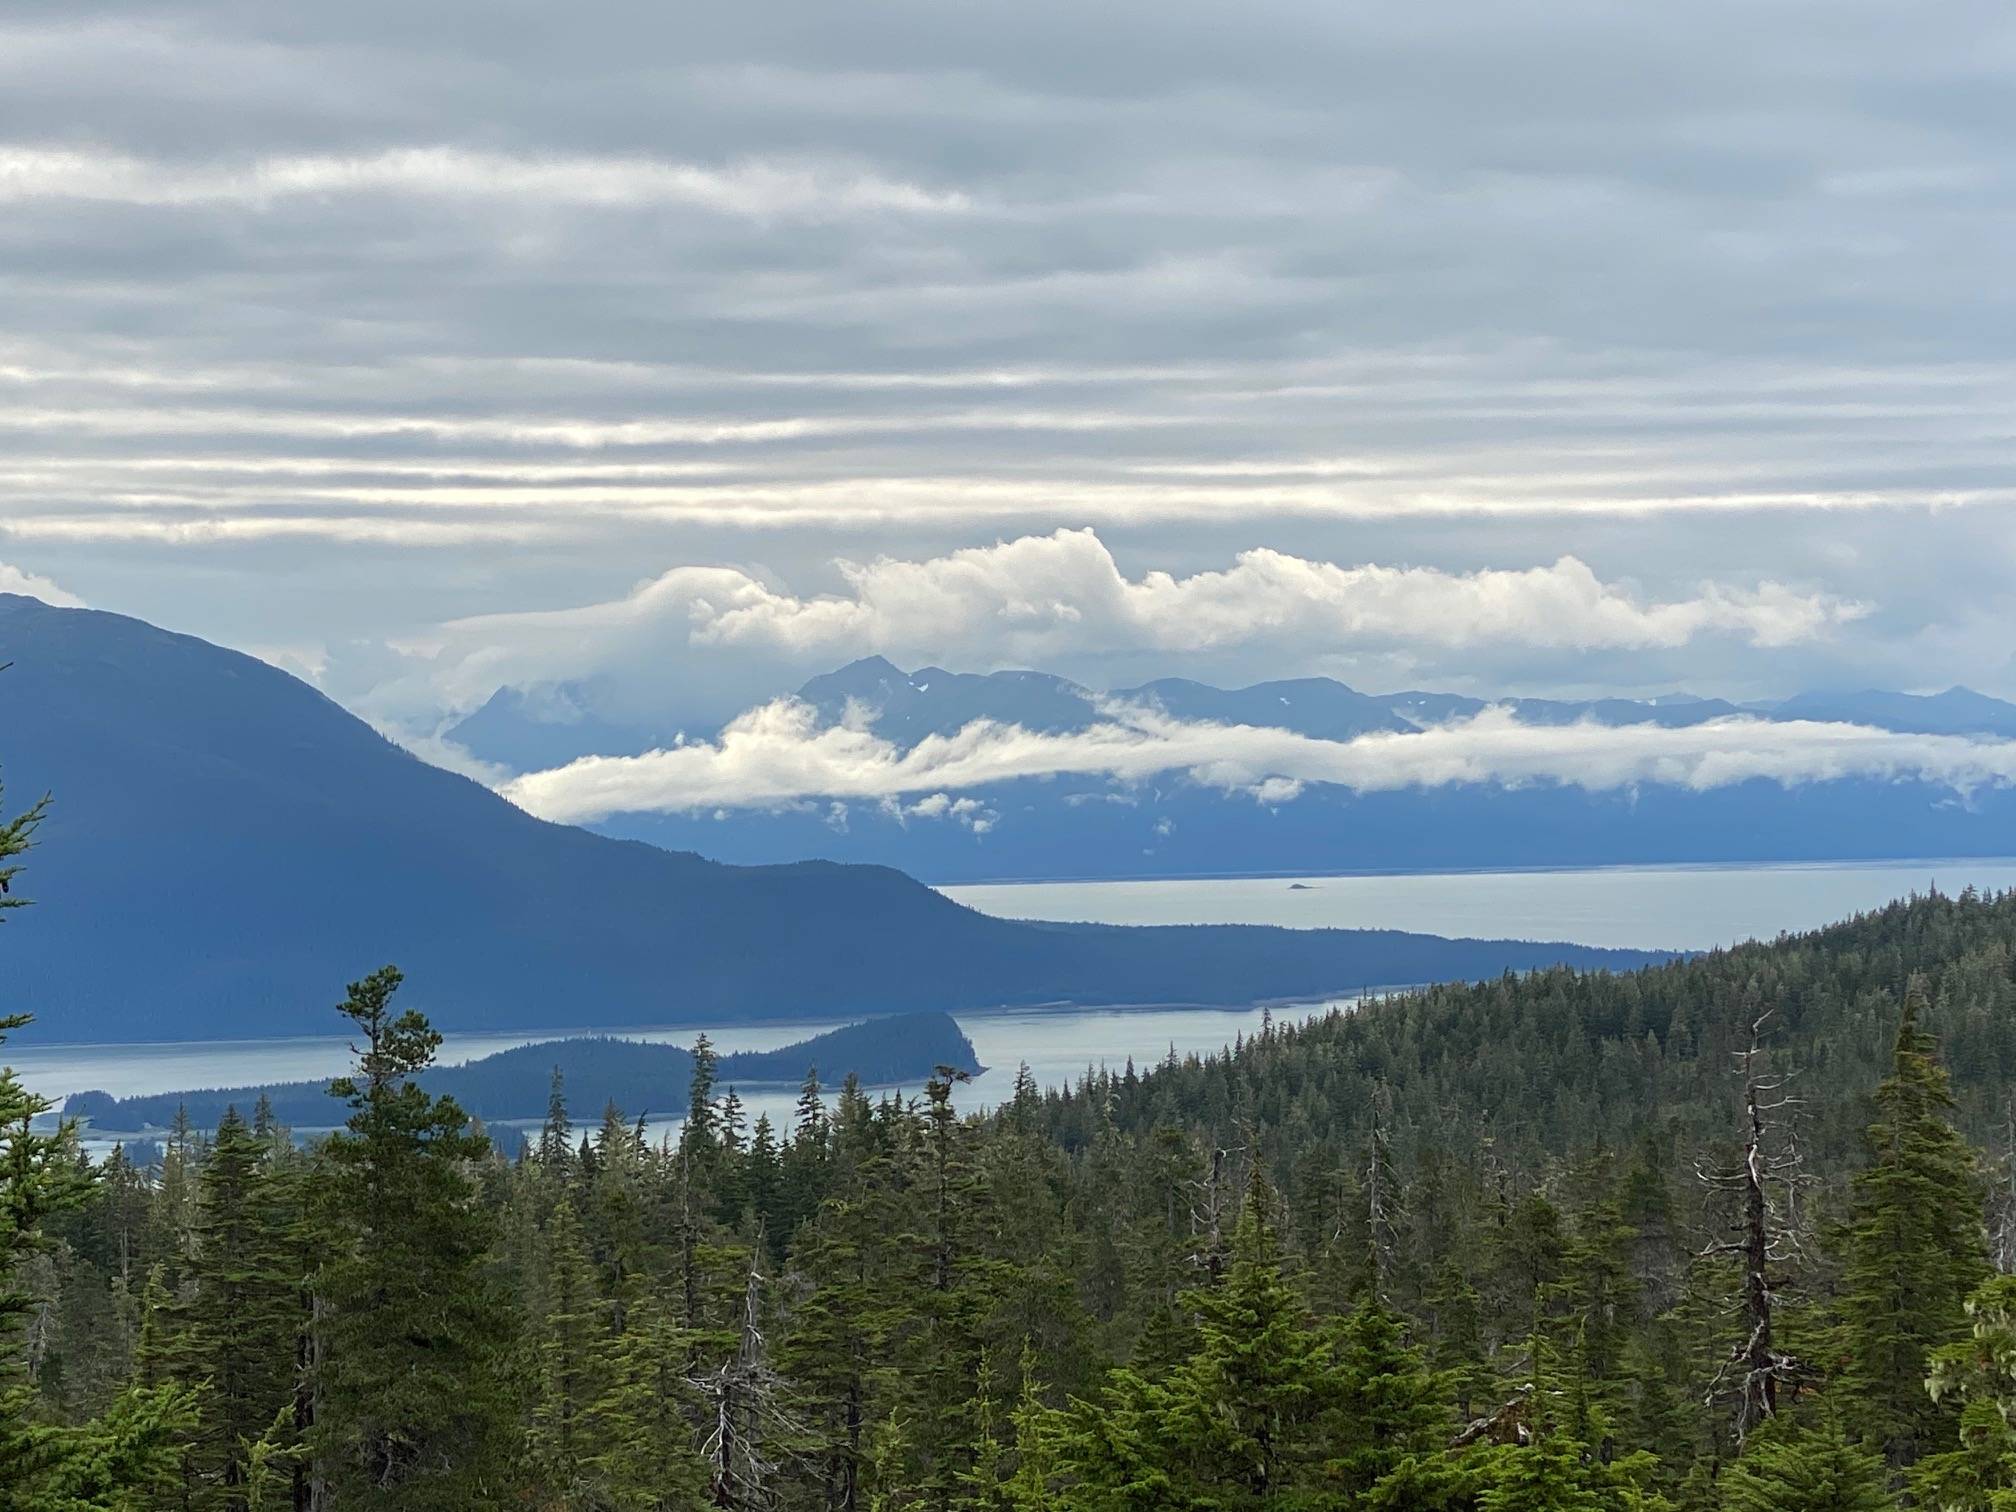 A view of the silhouette of North Douglas and heavy cloud cover over the Chilkats and Auke Bay on Aug. 19, 2020. (Courtesy Photo / Denise Carroll)